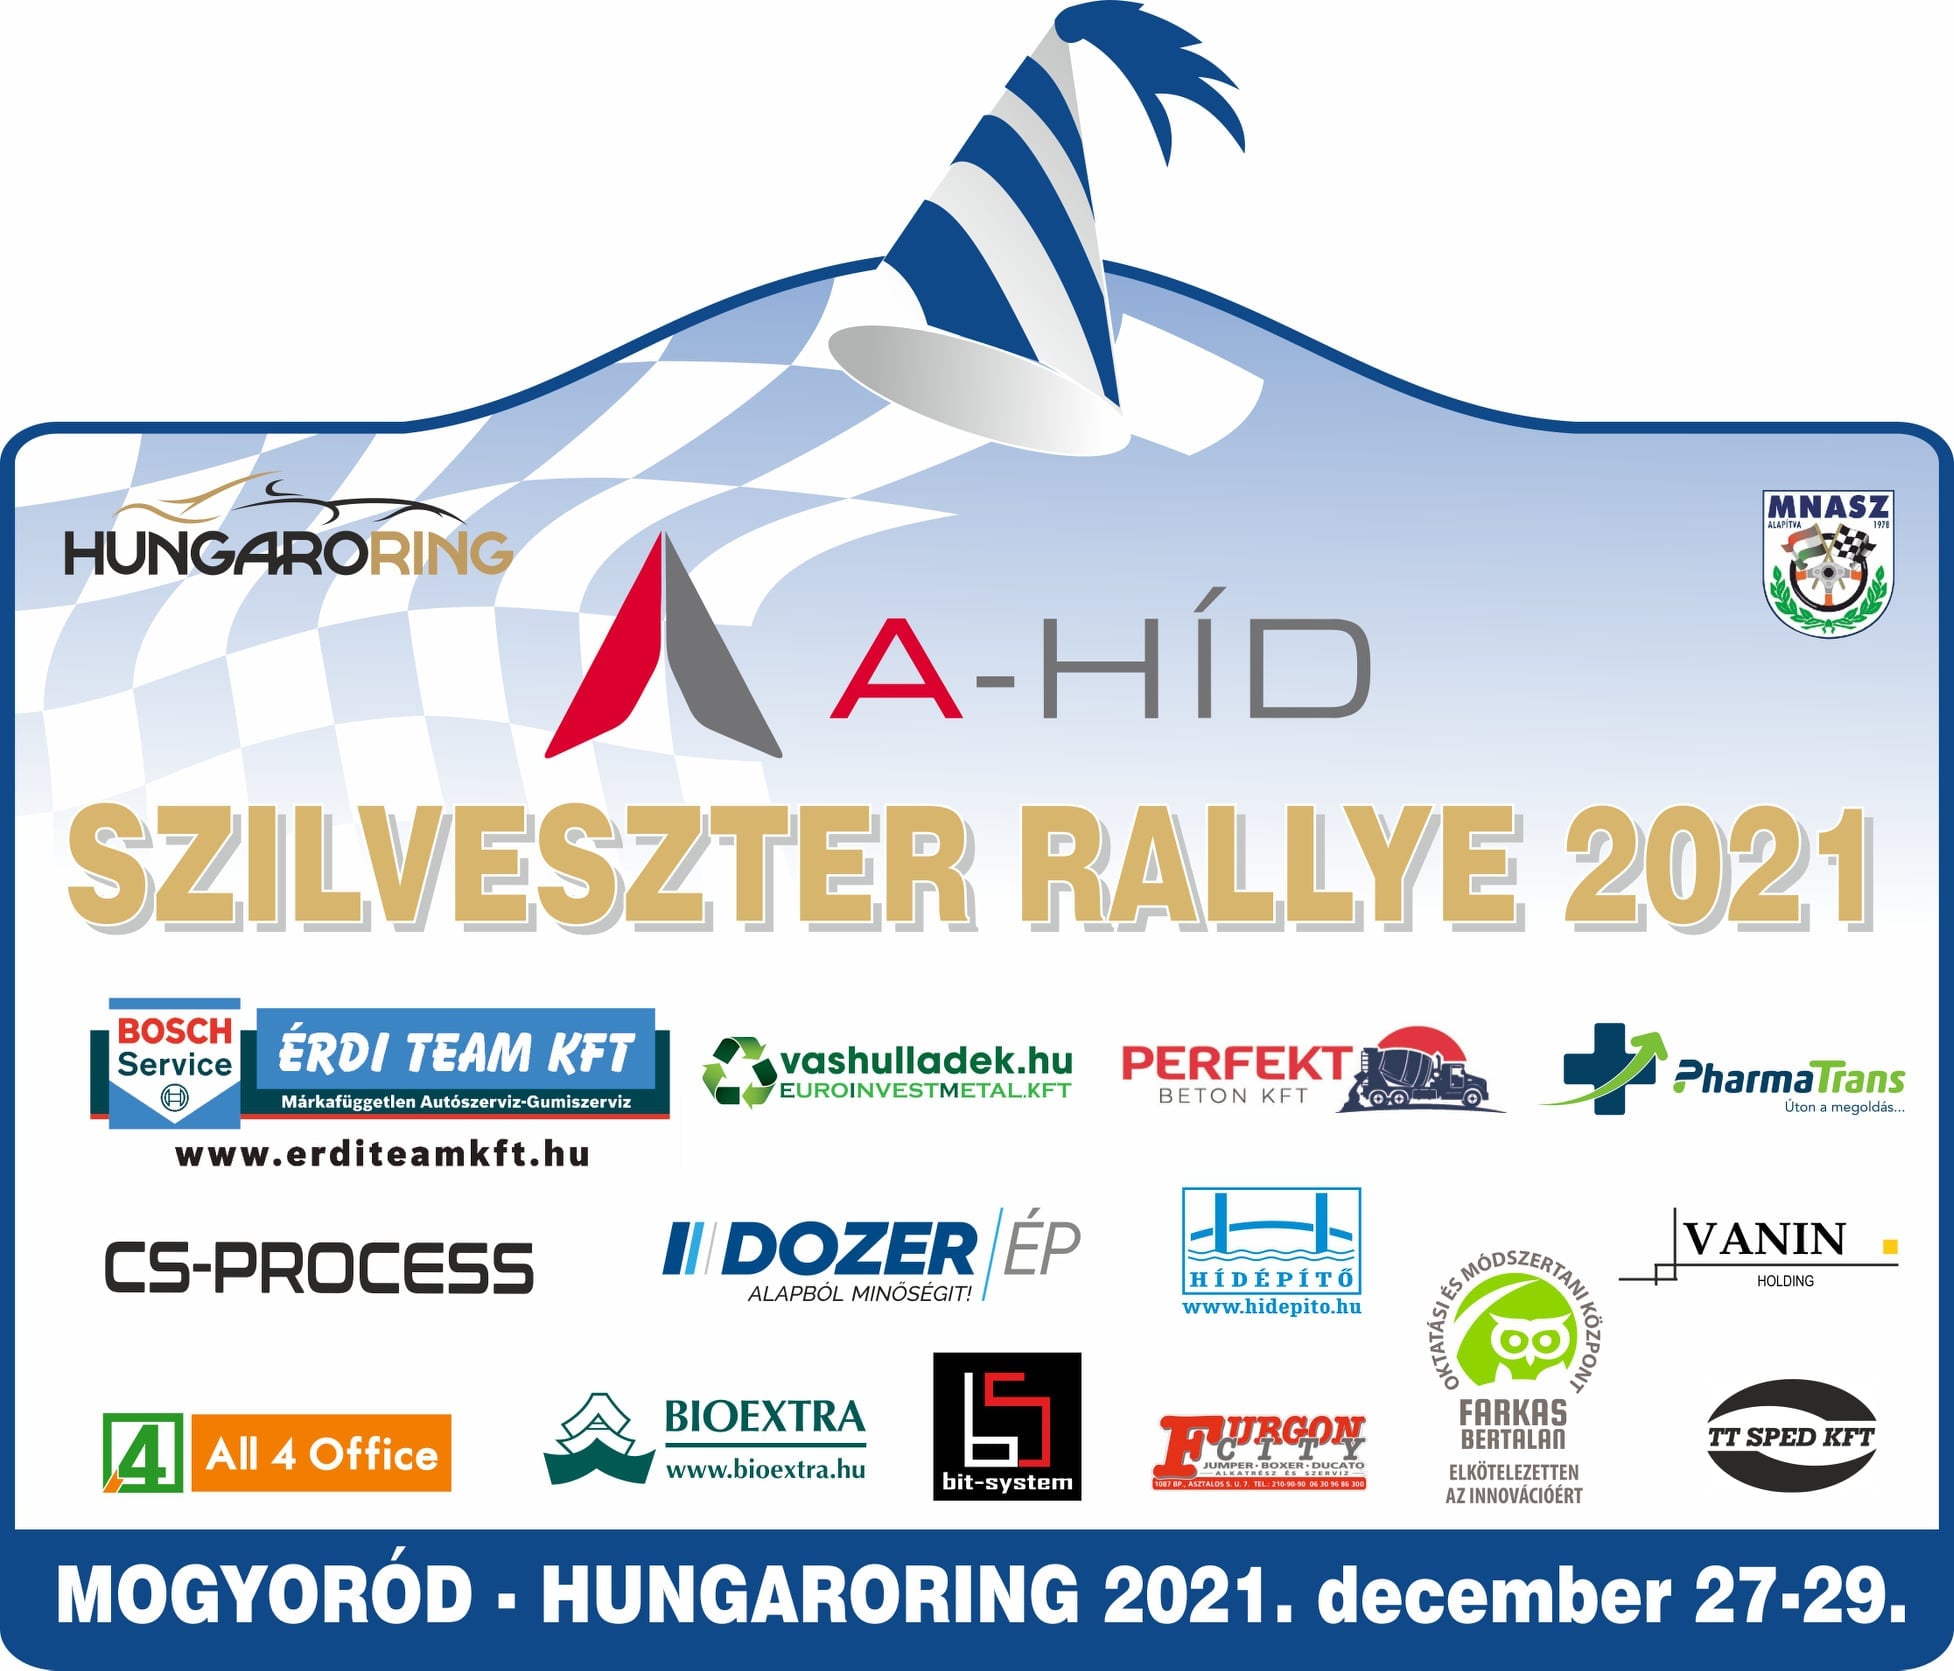 Year's End International Hungaroring Rally to Feature Over 200 Cars in Hungary